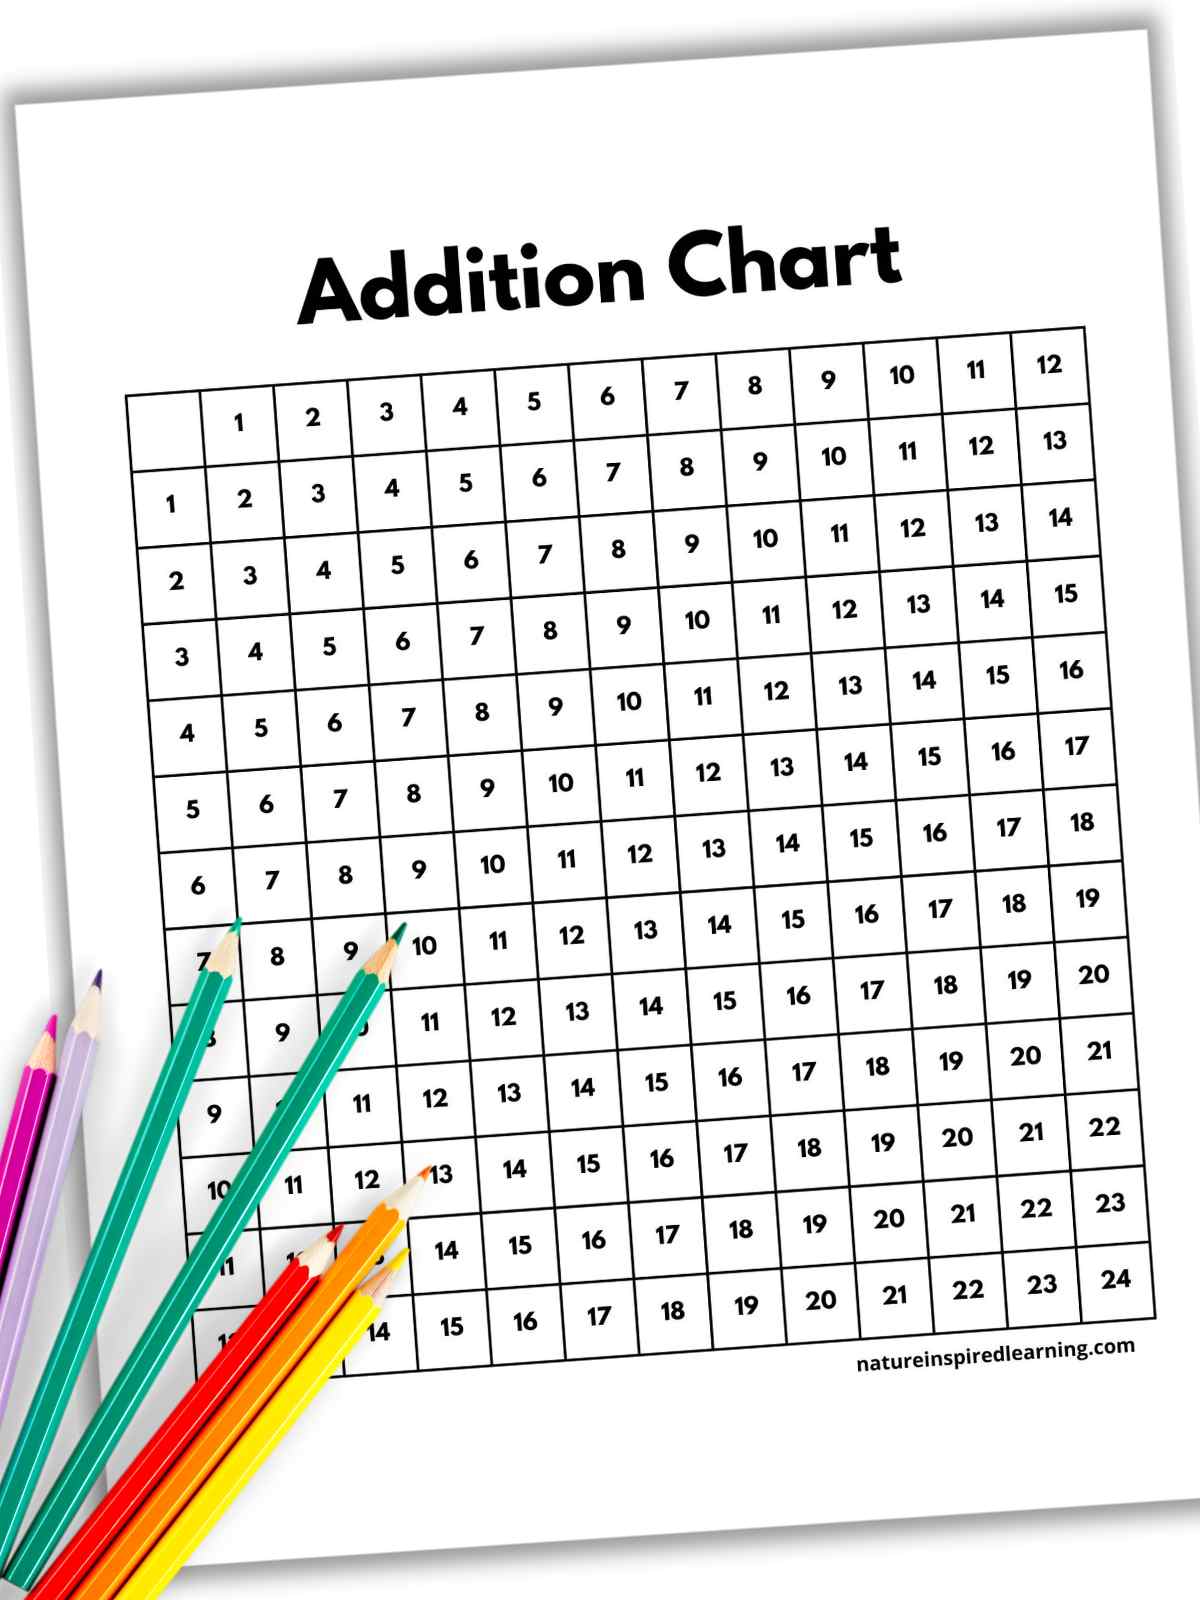 Black and white addition chart filled out with numbers 1-12 slanted with a drop shadow with colored pencils bottom left on top of the printable